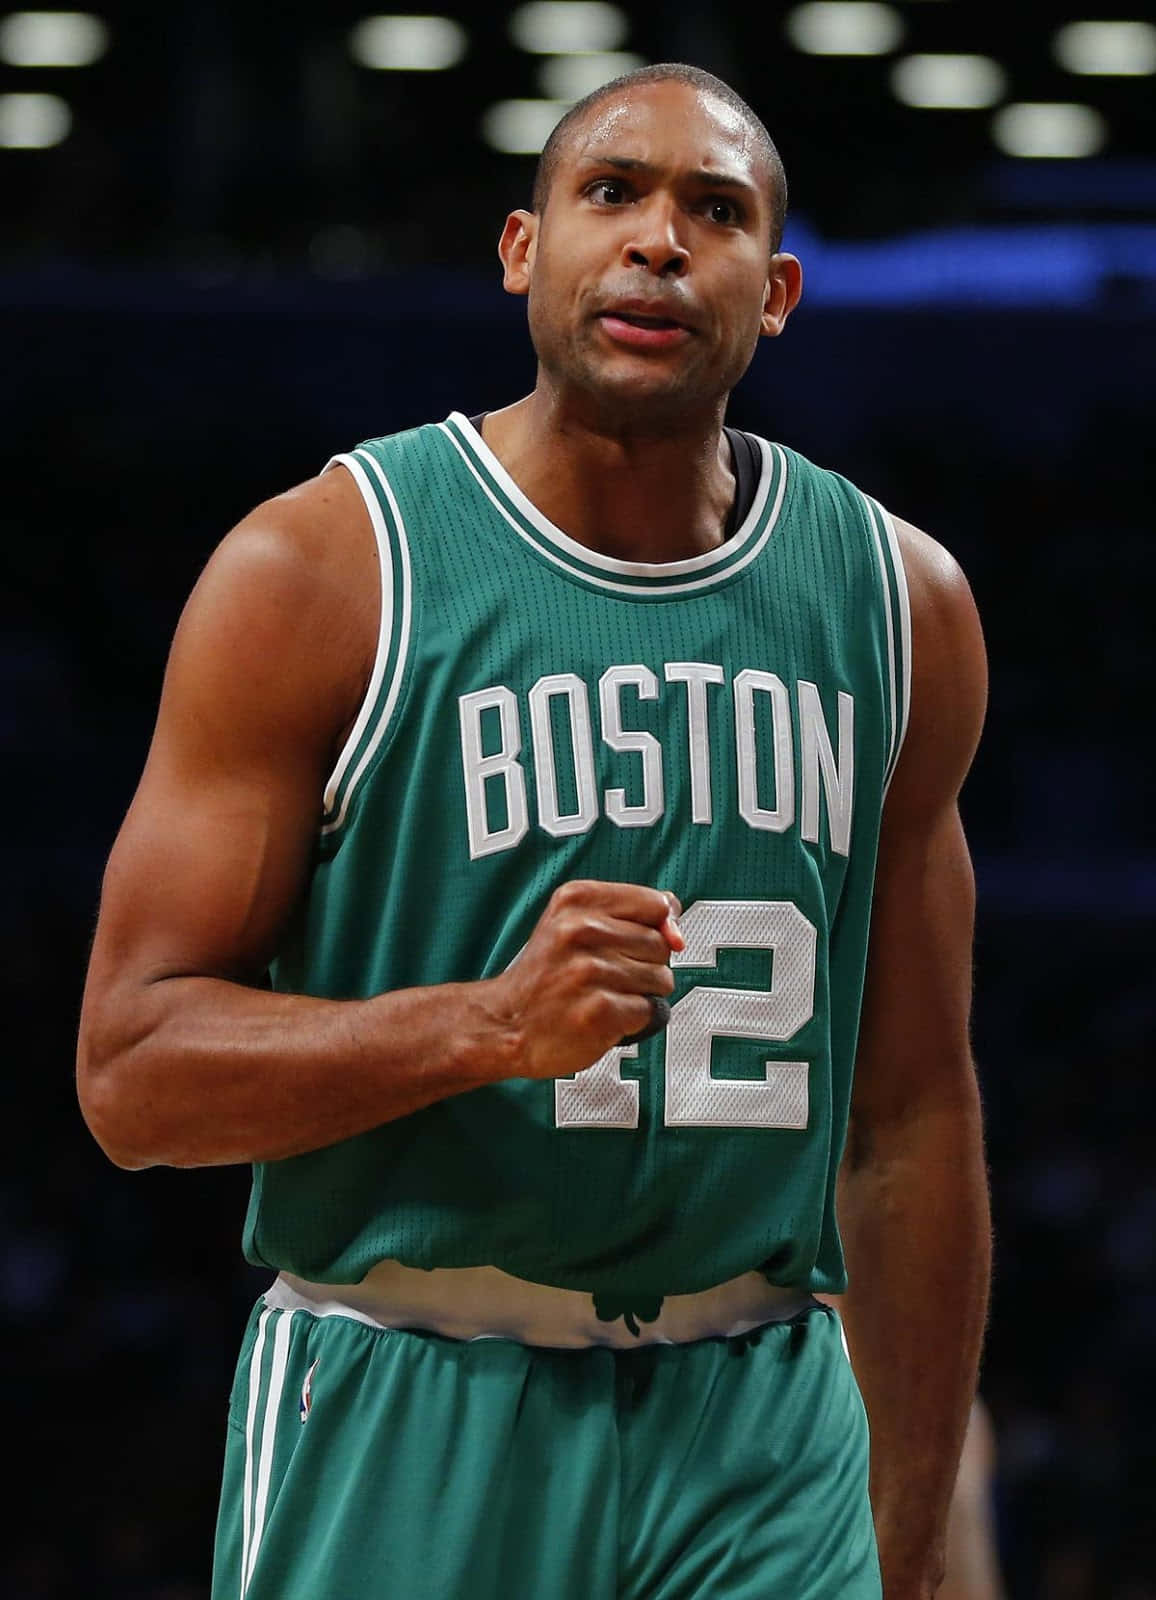 Al Horford looks towards the court with determination